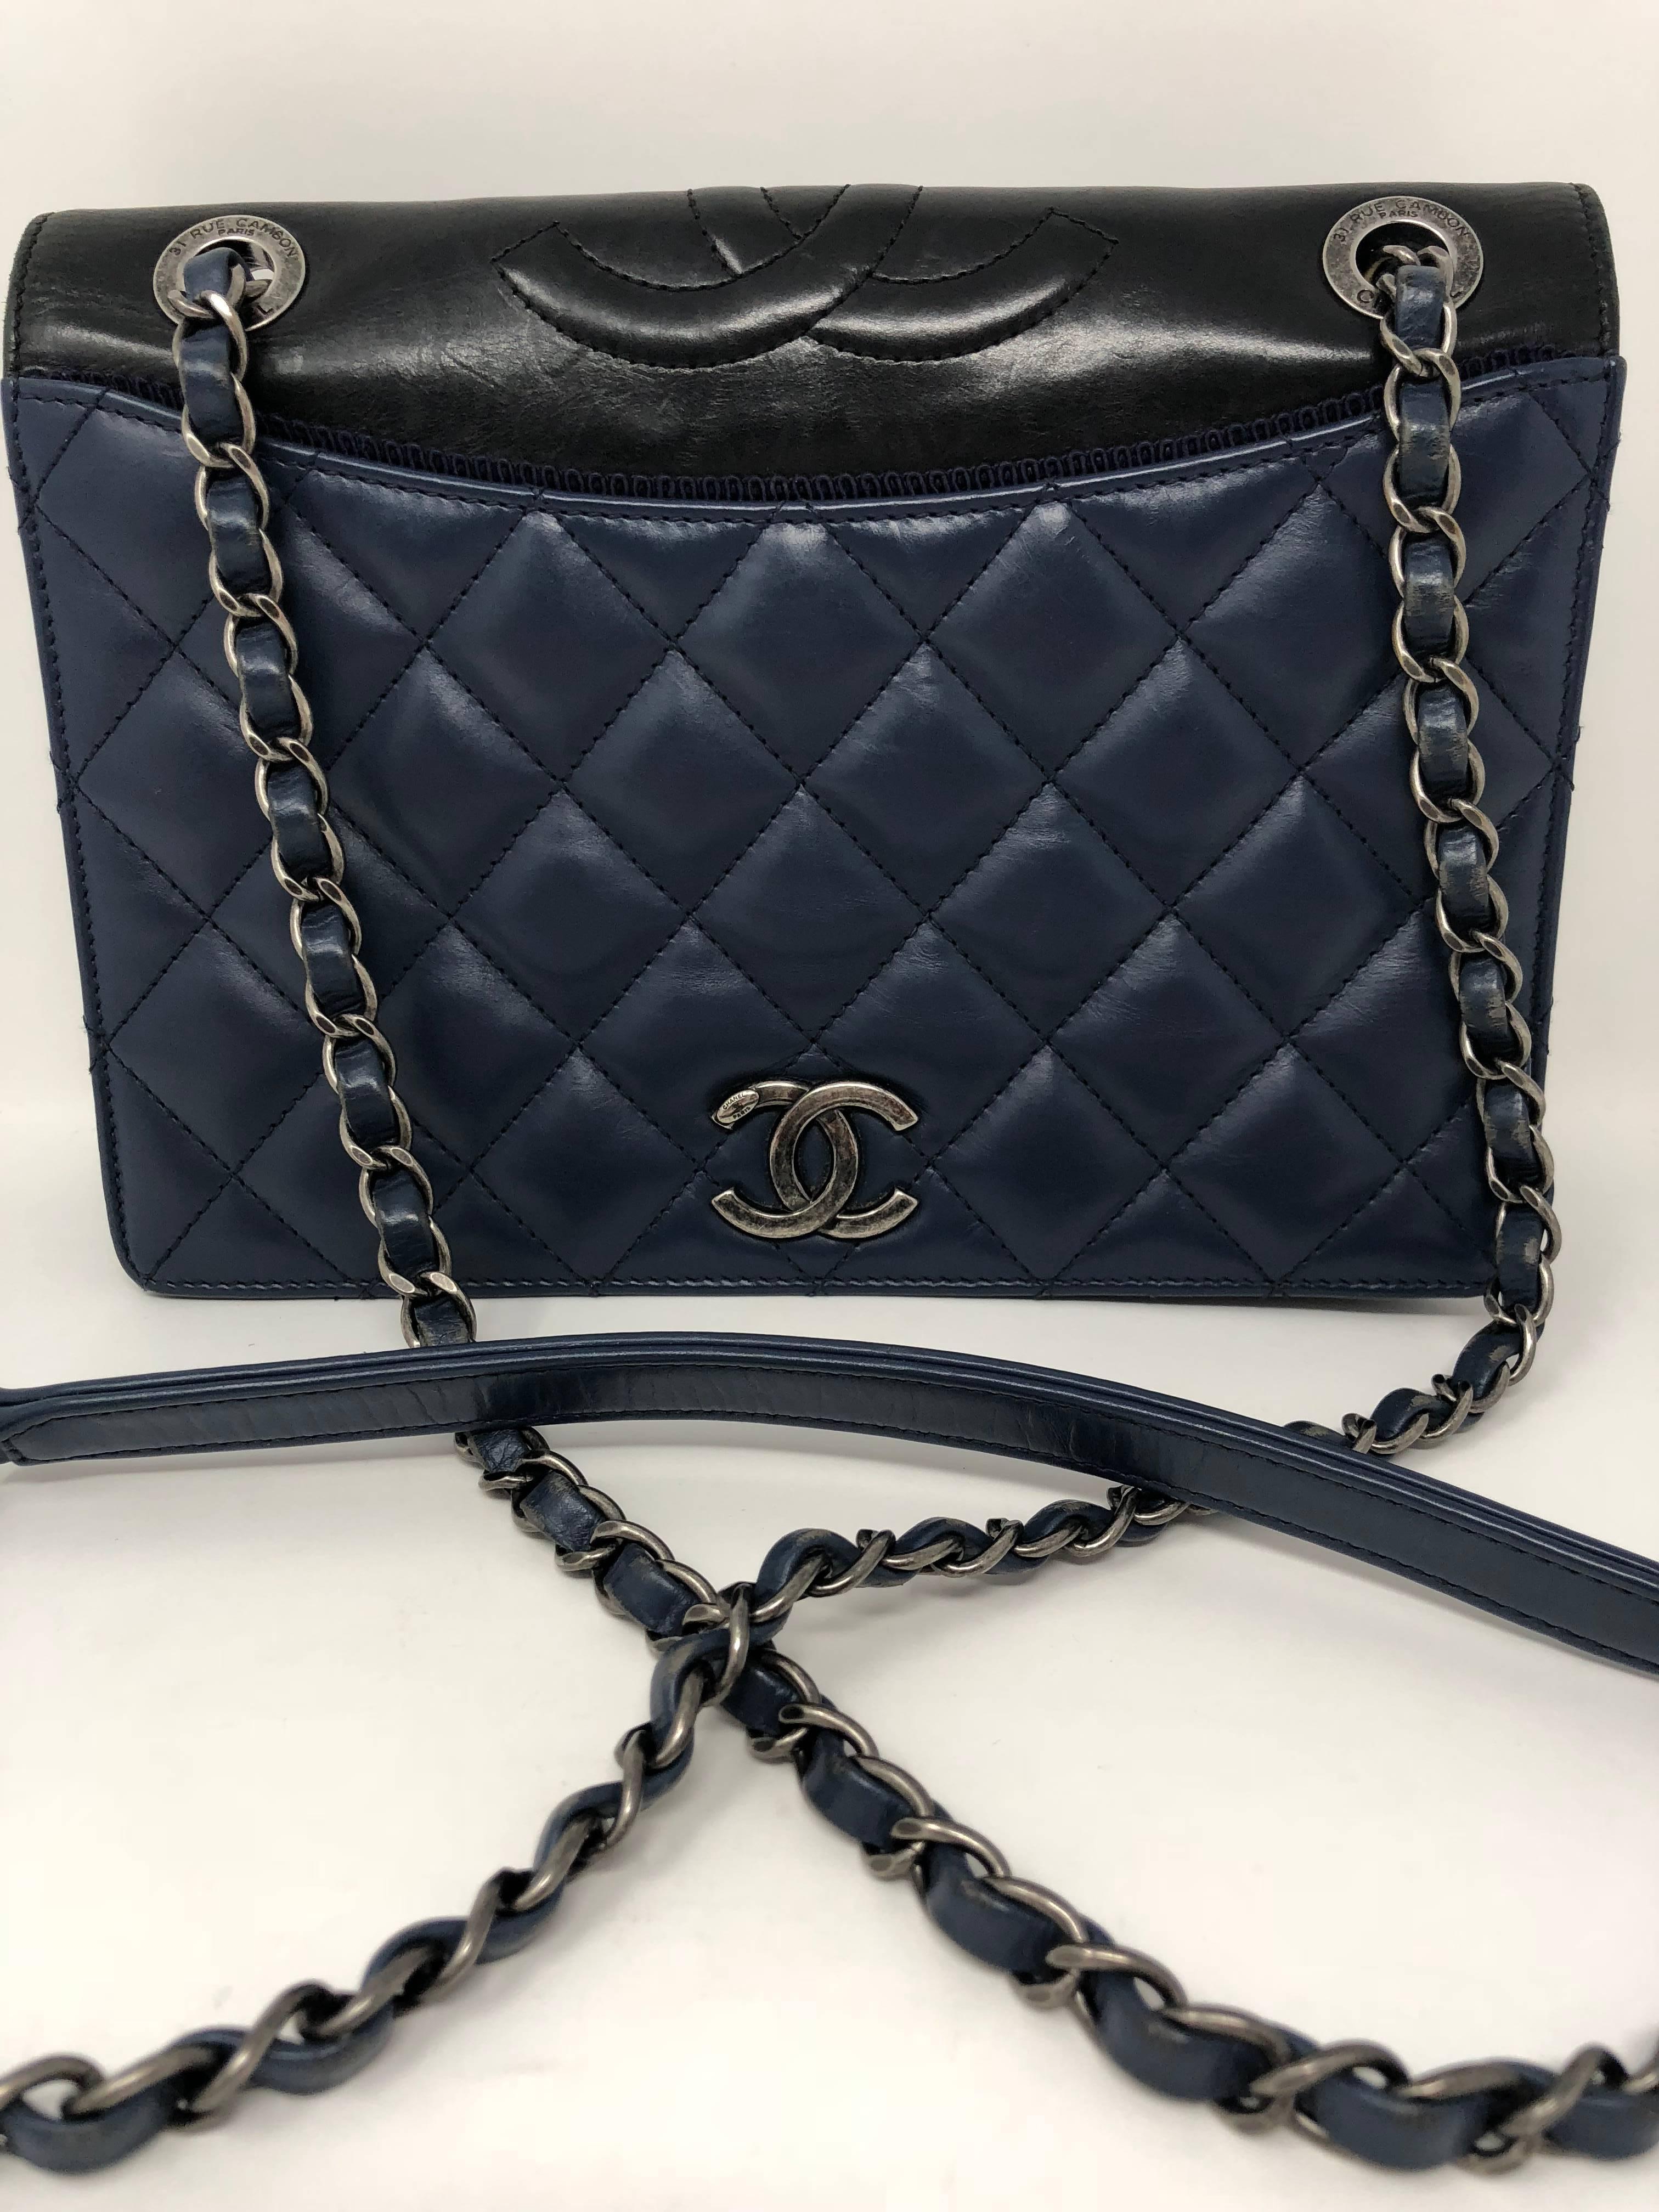 Blue quilted leather flap bag with antique silver-tone hardware with black leather trim. The chain links are adjustable to wear crossbody or as a shoulder bag. Burgundy interior. From the Fall 2015 Collection. Guaranteed authentic.